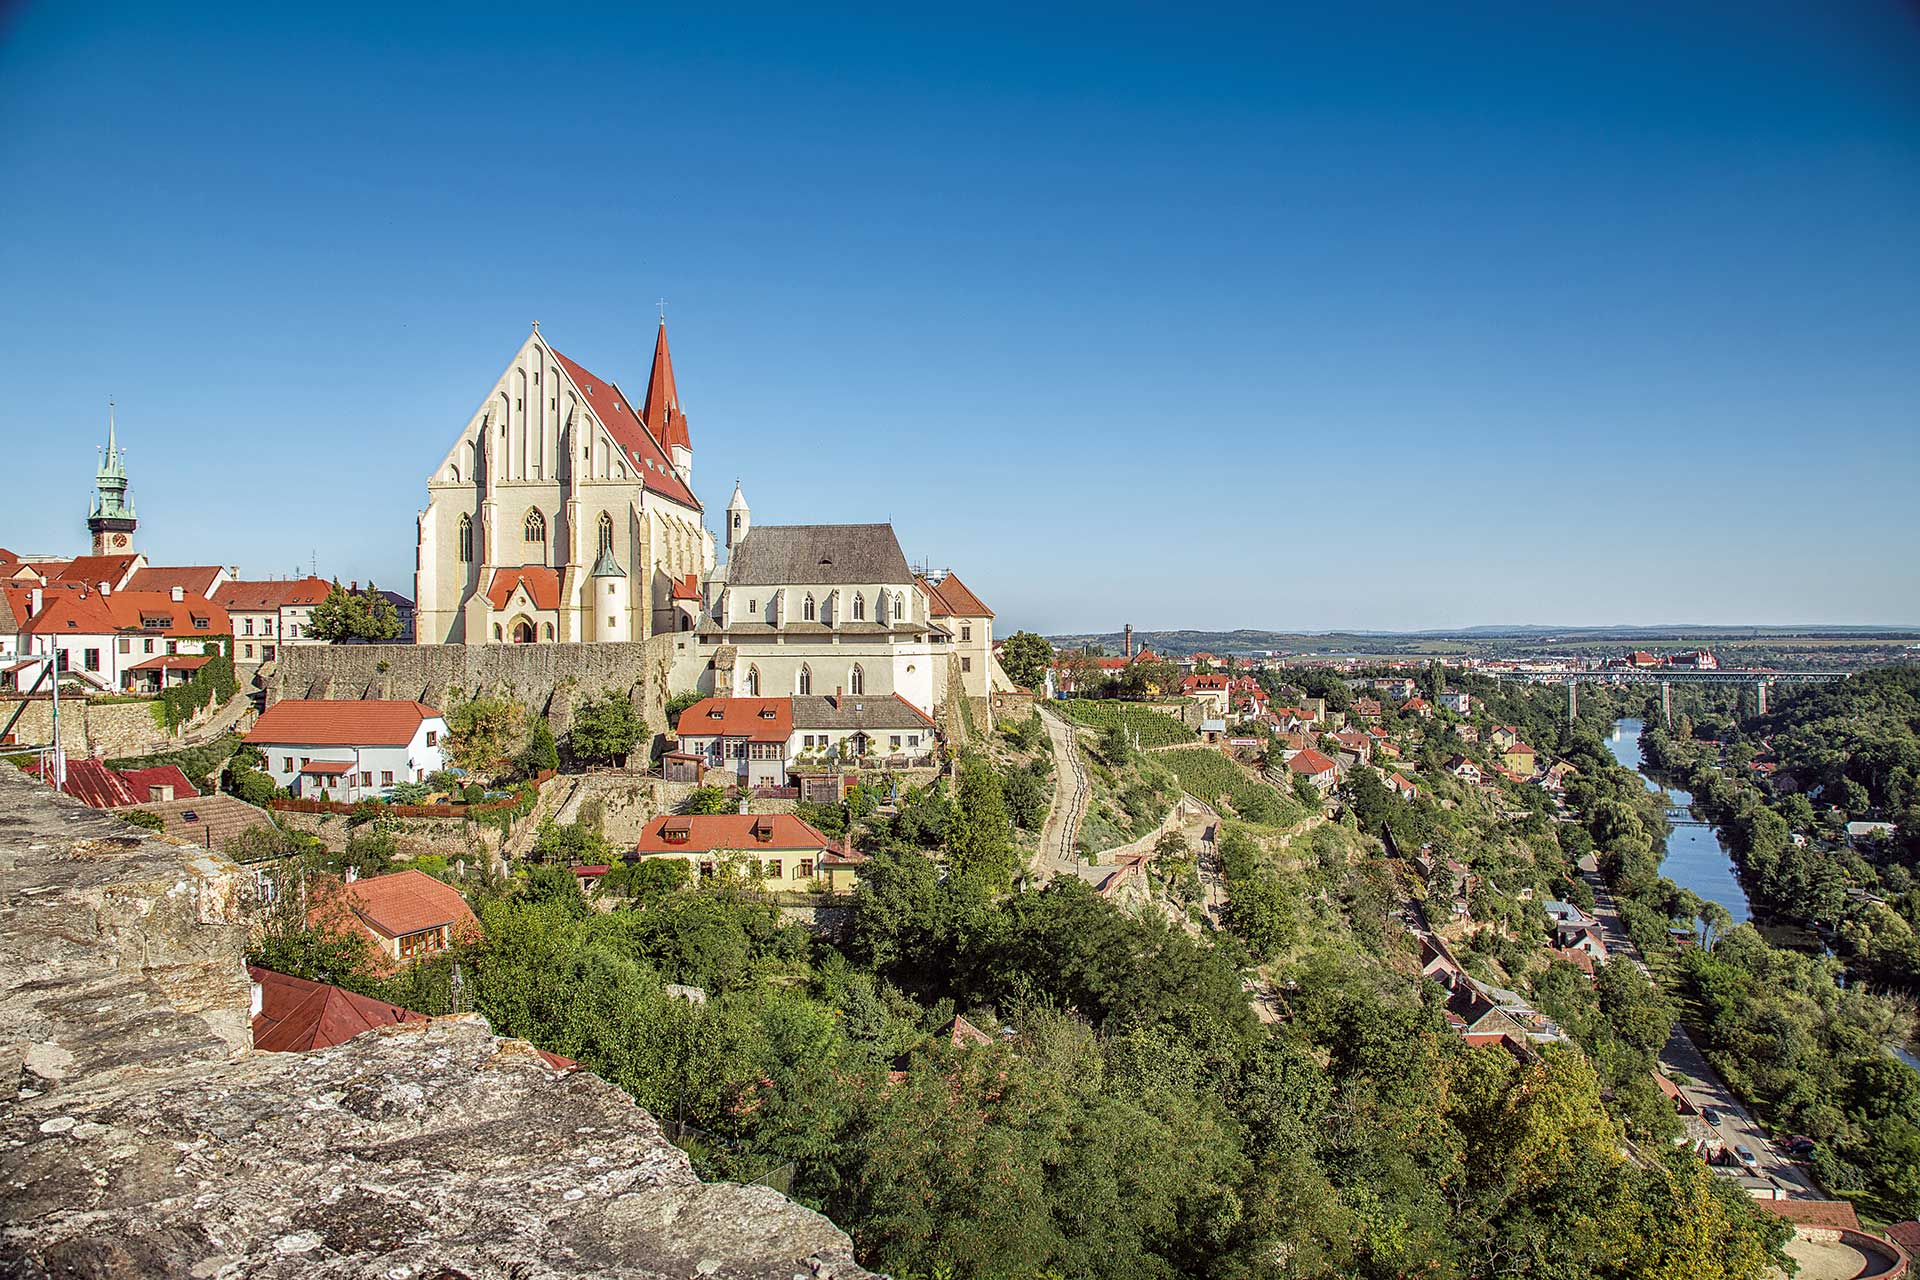 Znojmo – A Town with Special Attributes